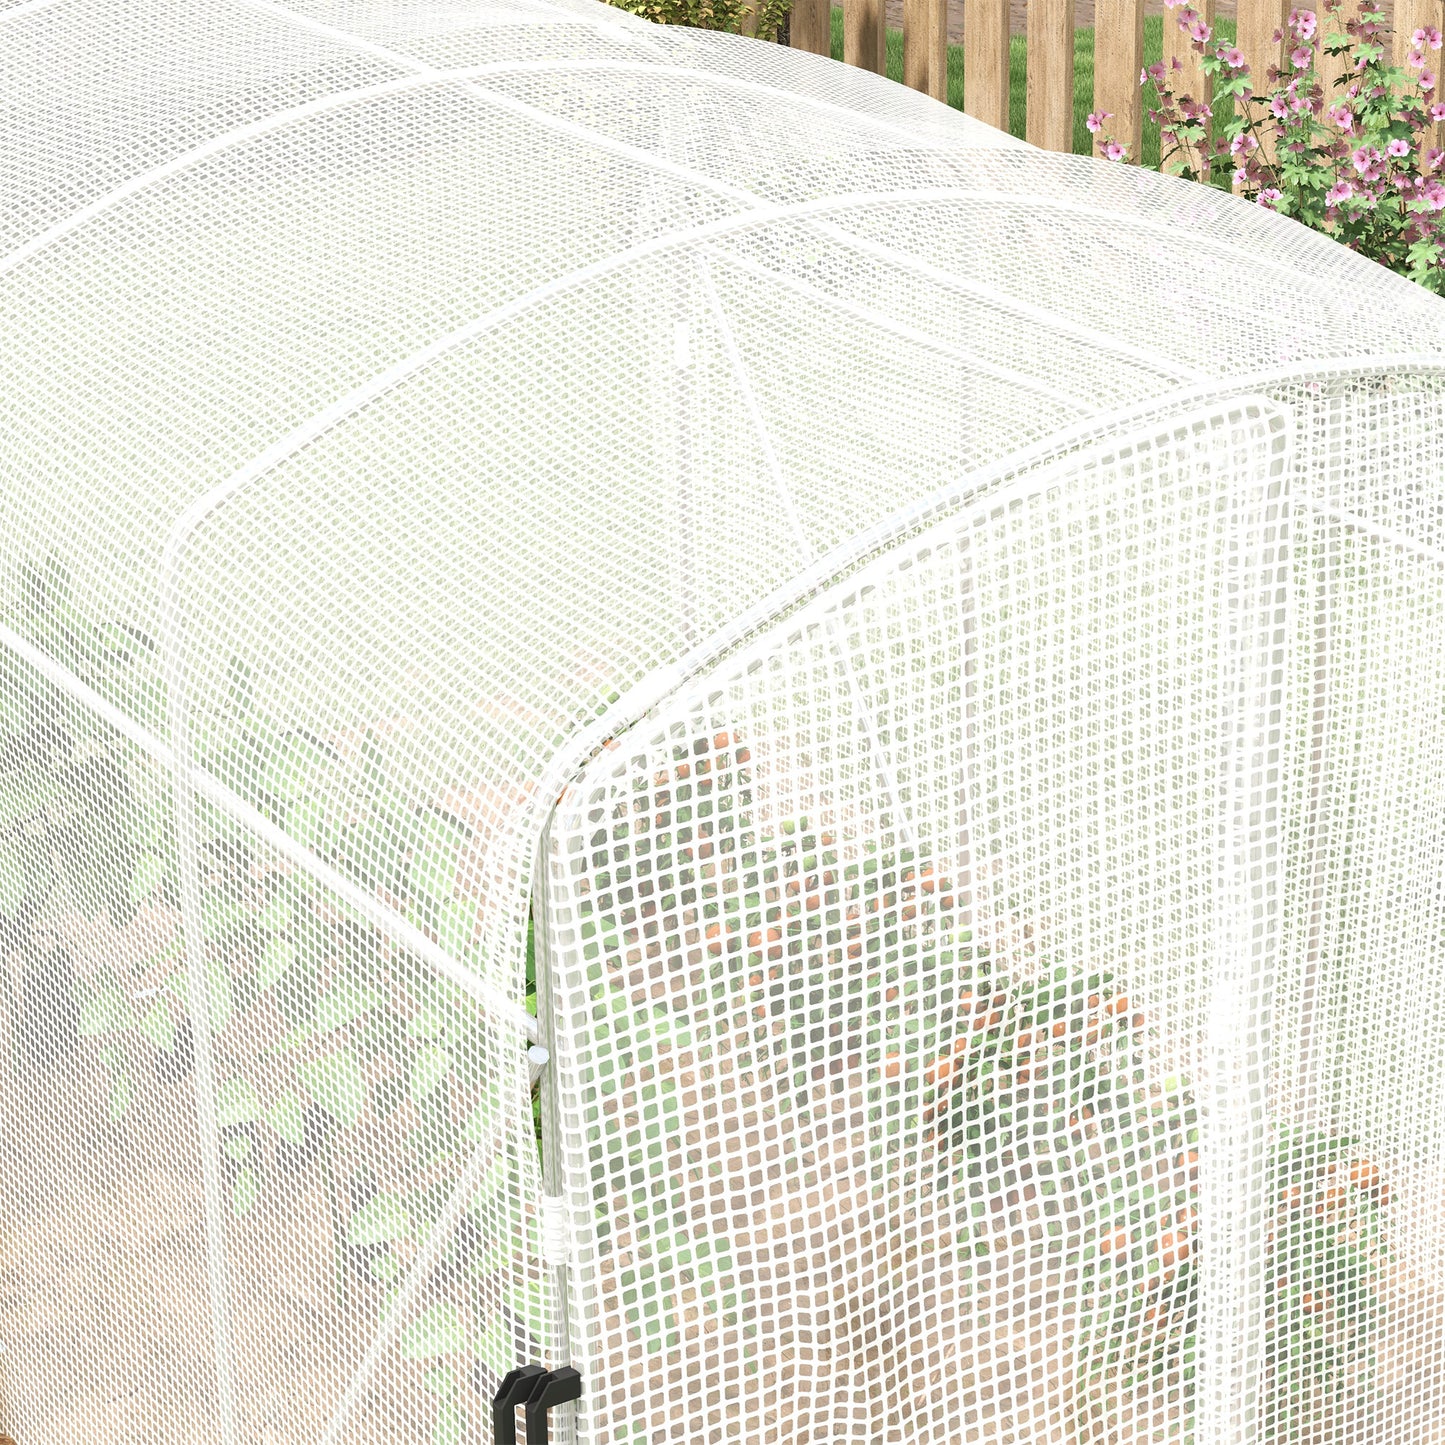 Outsunny Polytunnel Greenhouse Walk-in Grow House with UV-resistant PE Cover, Door and Galvanised Steel Frame, 2 x 2 x 2m, White